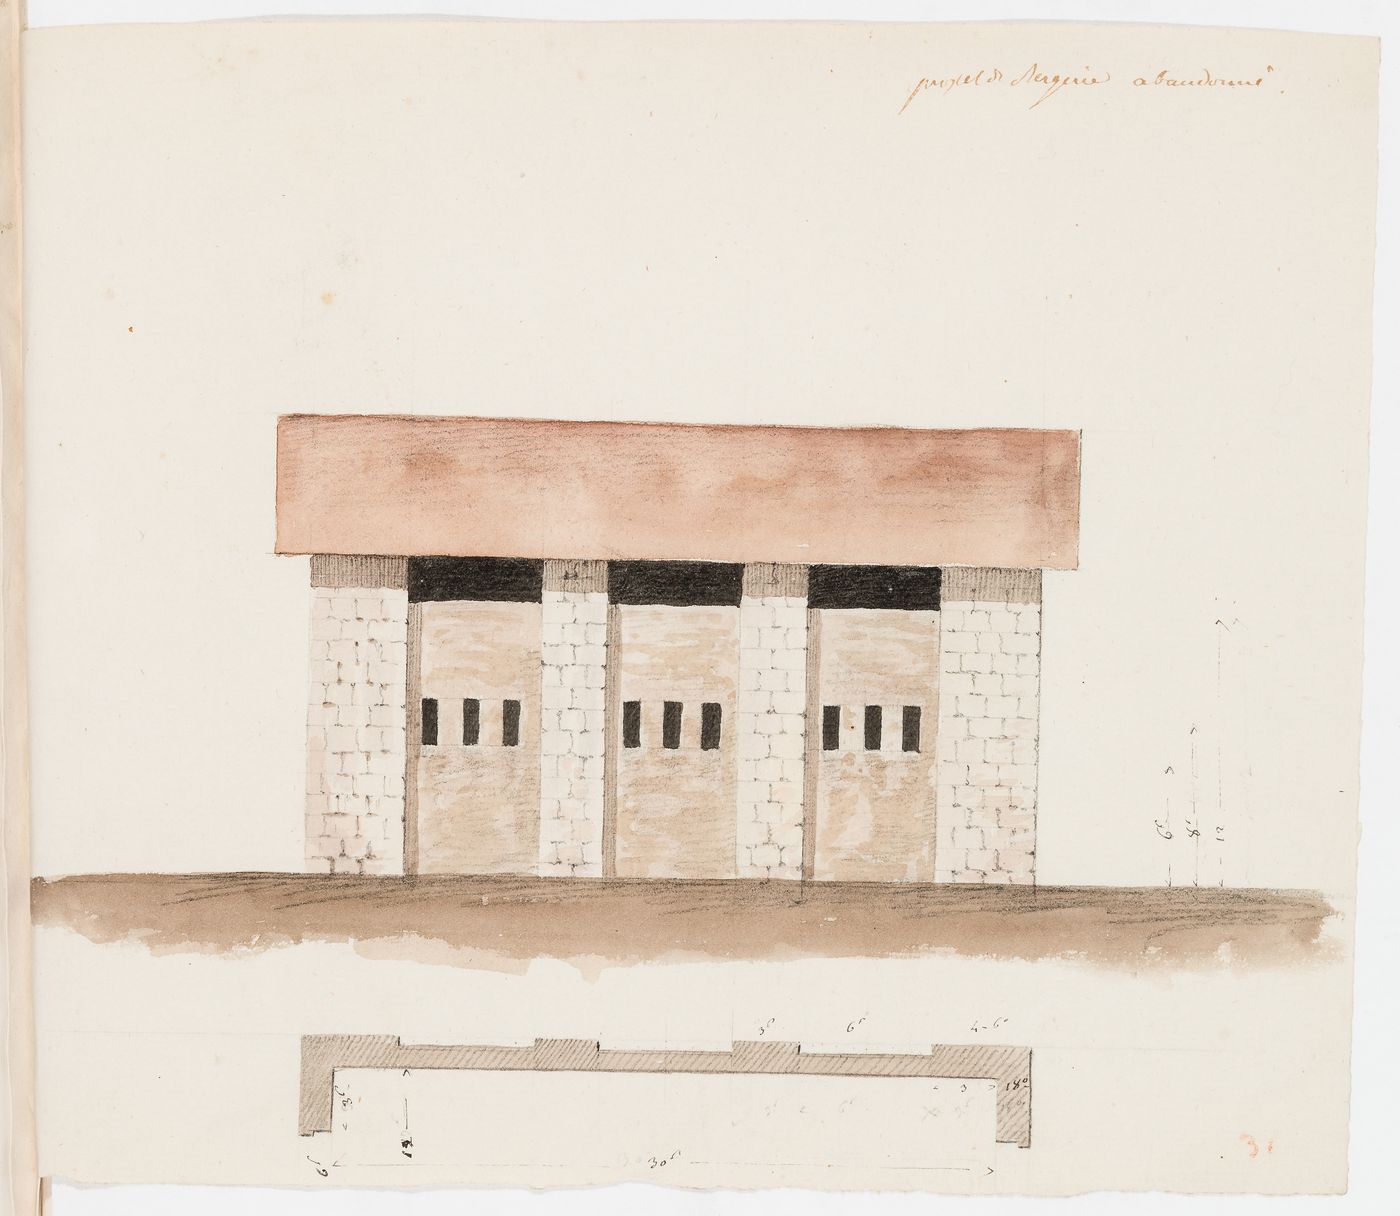 Front elevation and partial plan for a sheepfold, probably for Domaine de La Vallée